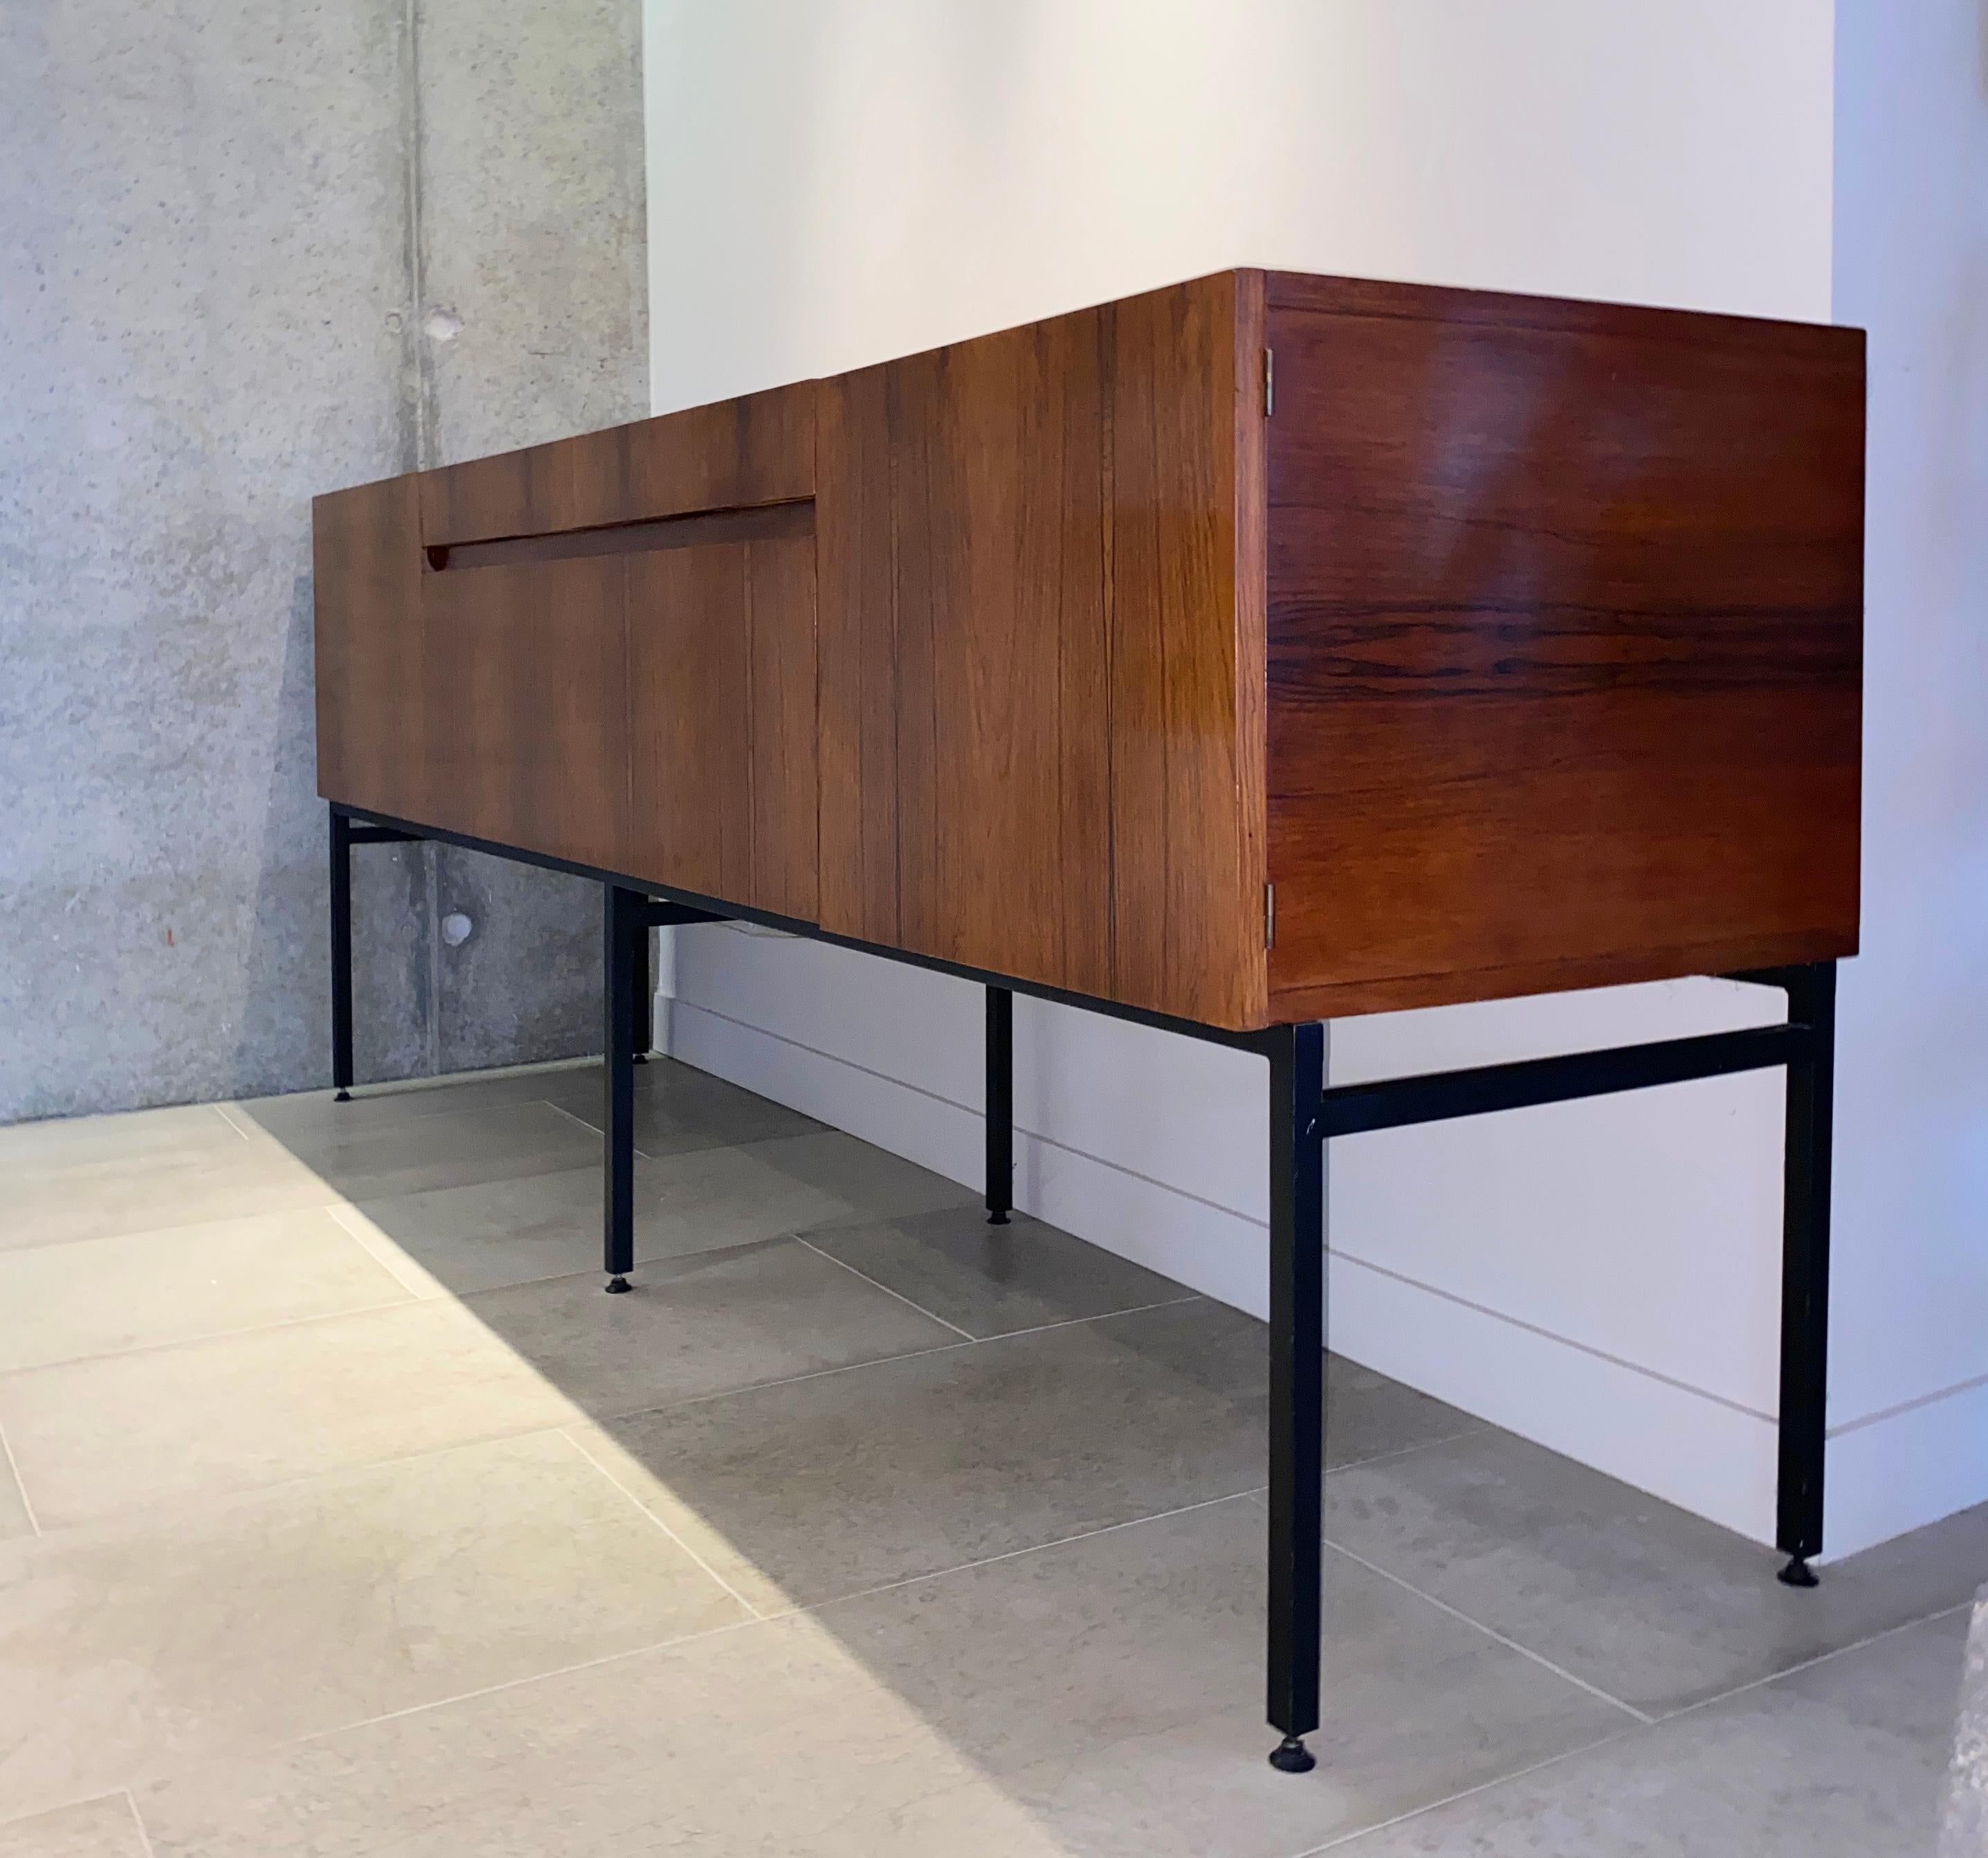 Alain Richard, large sideboard in rosewood, black lacquered metal, 800 series edited by Meubles TV, France, 1958.
    